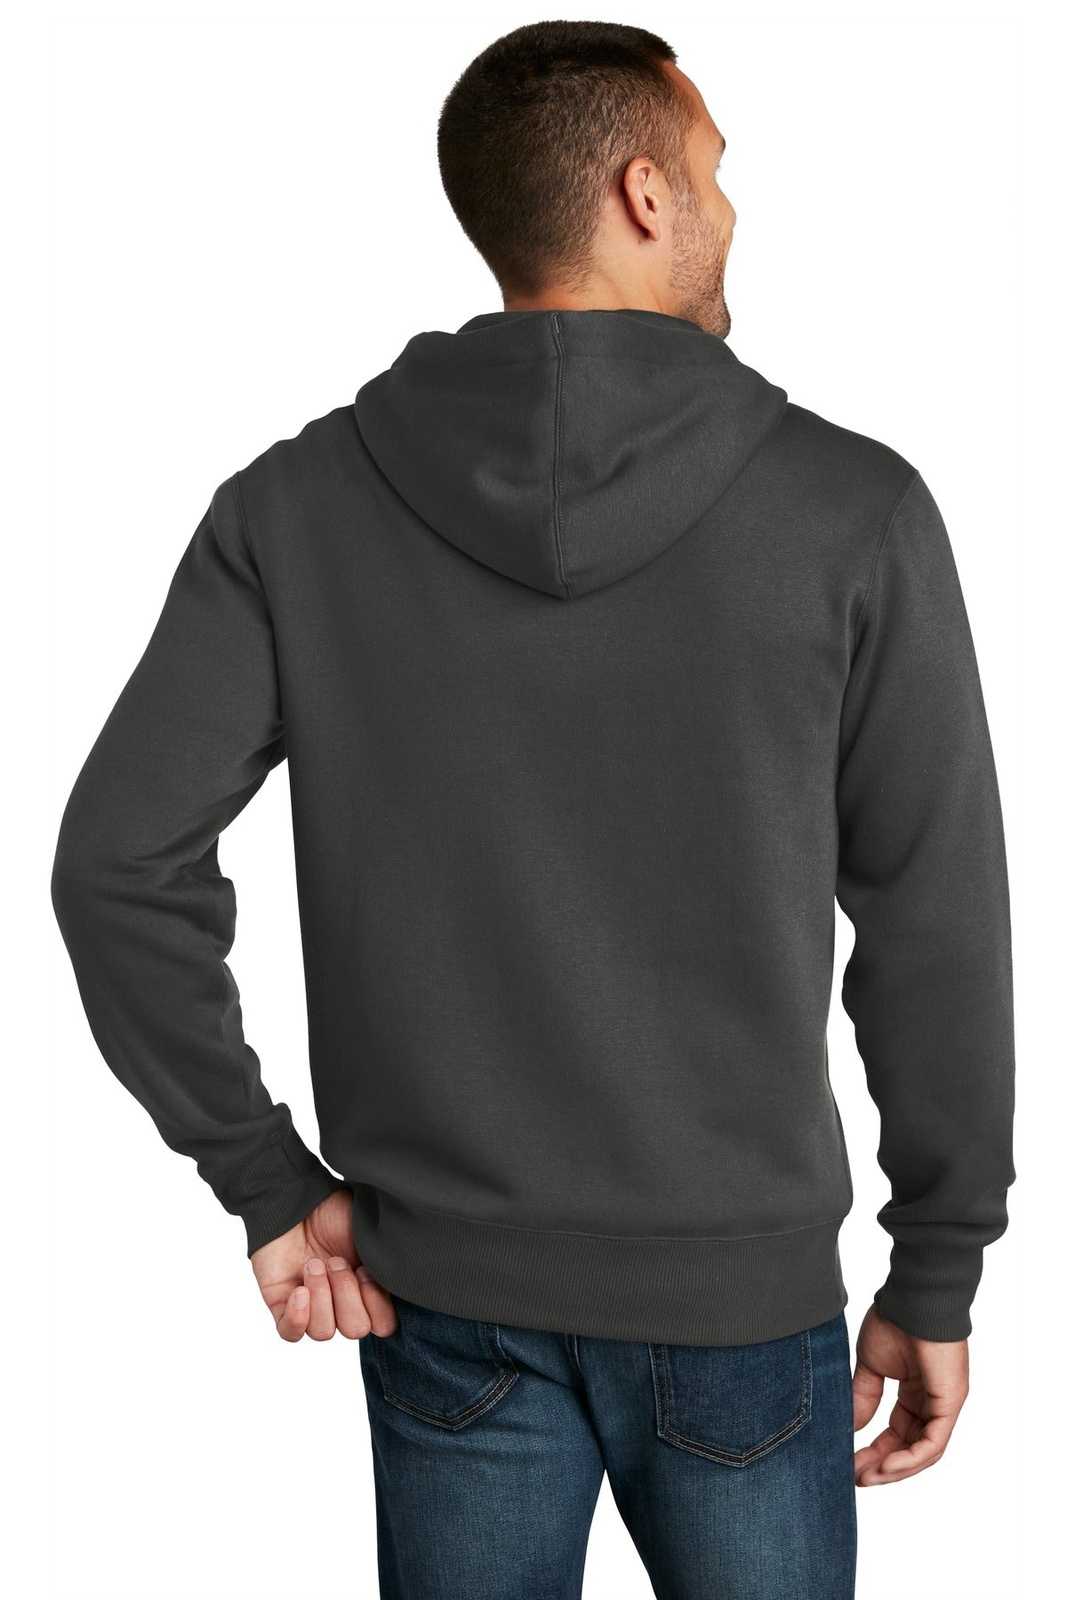 District DT1103 Perfect Weight Fleece Full-Zip Hoodie - Charcoal - HIT a Double - 2